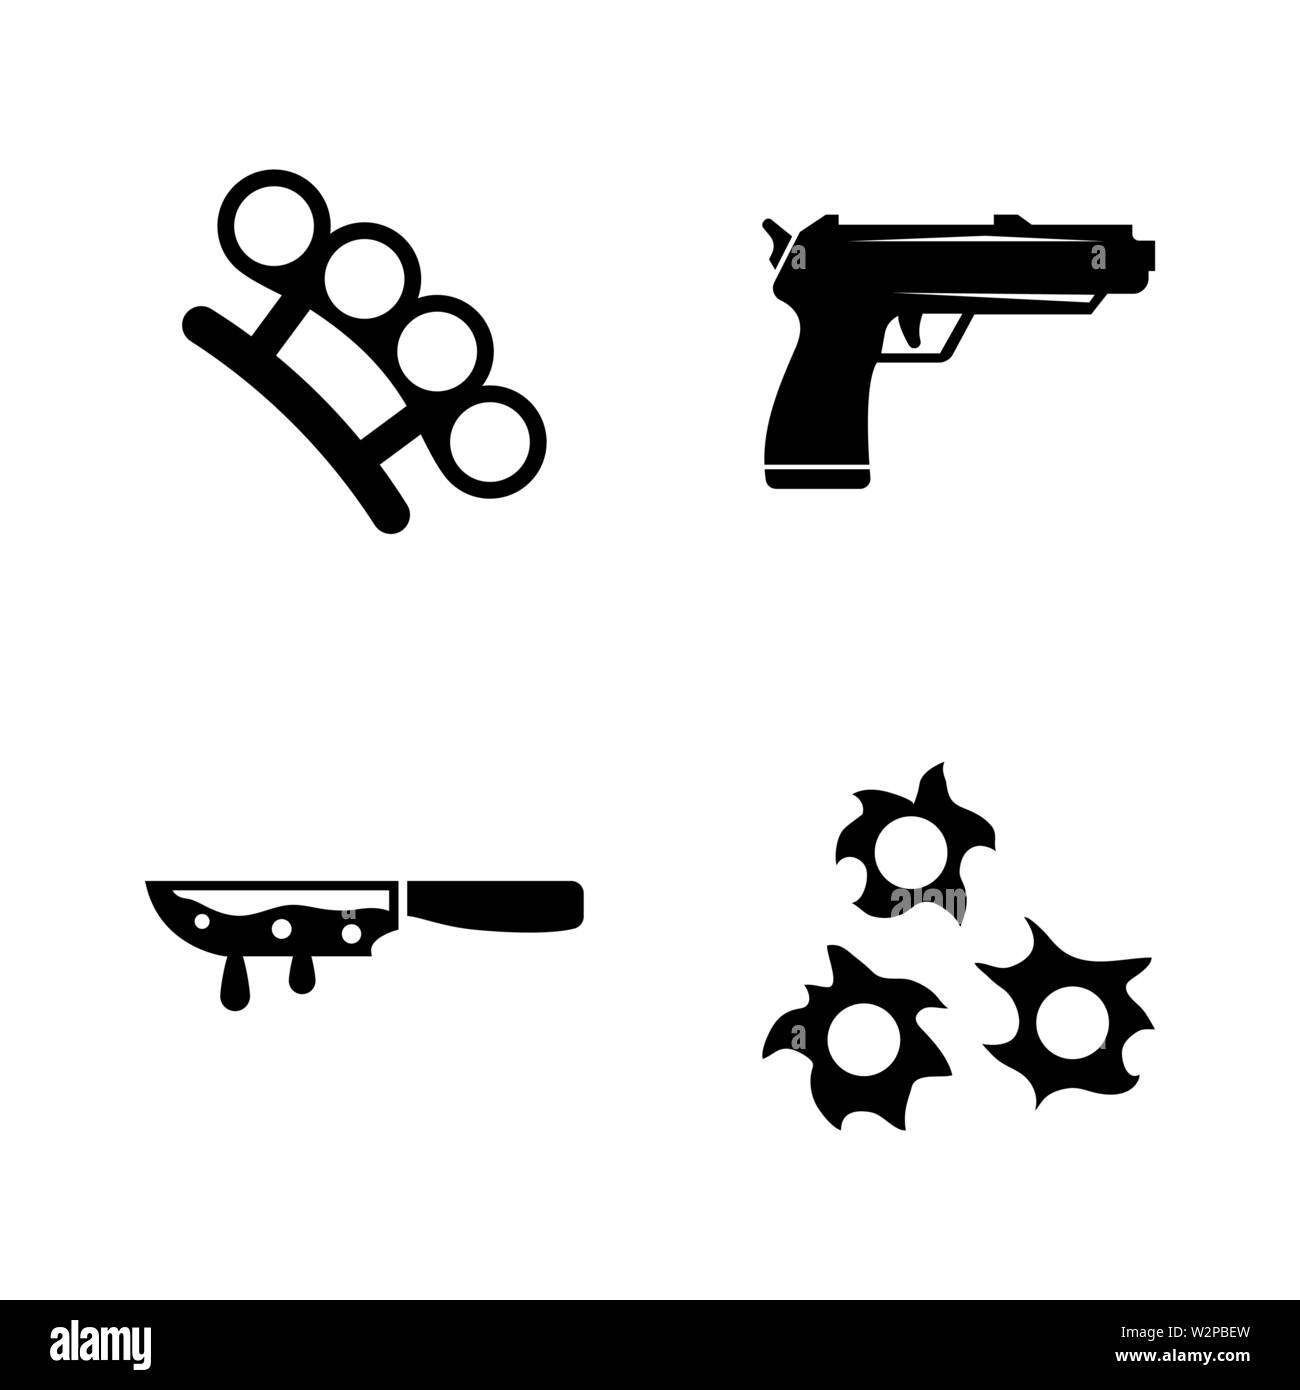 Crime. Simple Related Vector Icons Set for Video, Mobile Apps, Web Sites, Print Projects and Your Design. Black Flat Illustration on White Background. Stock Vector